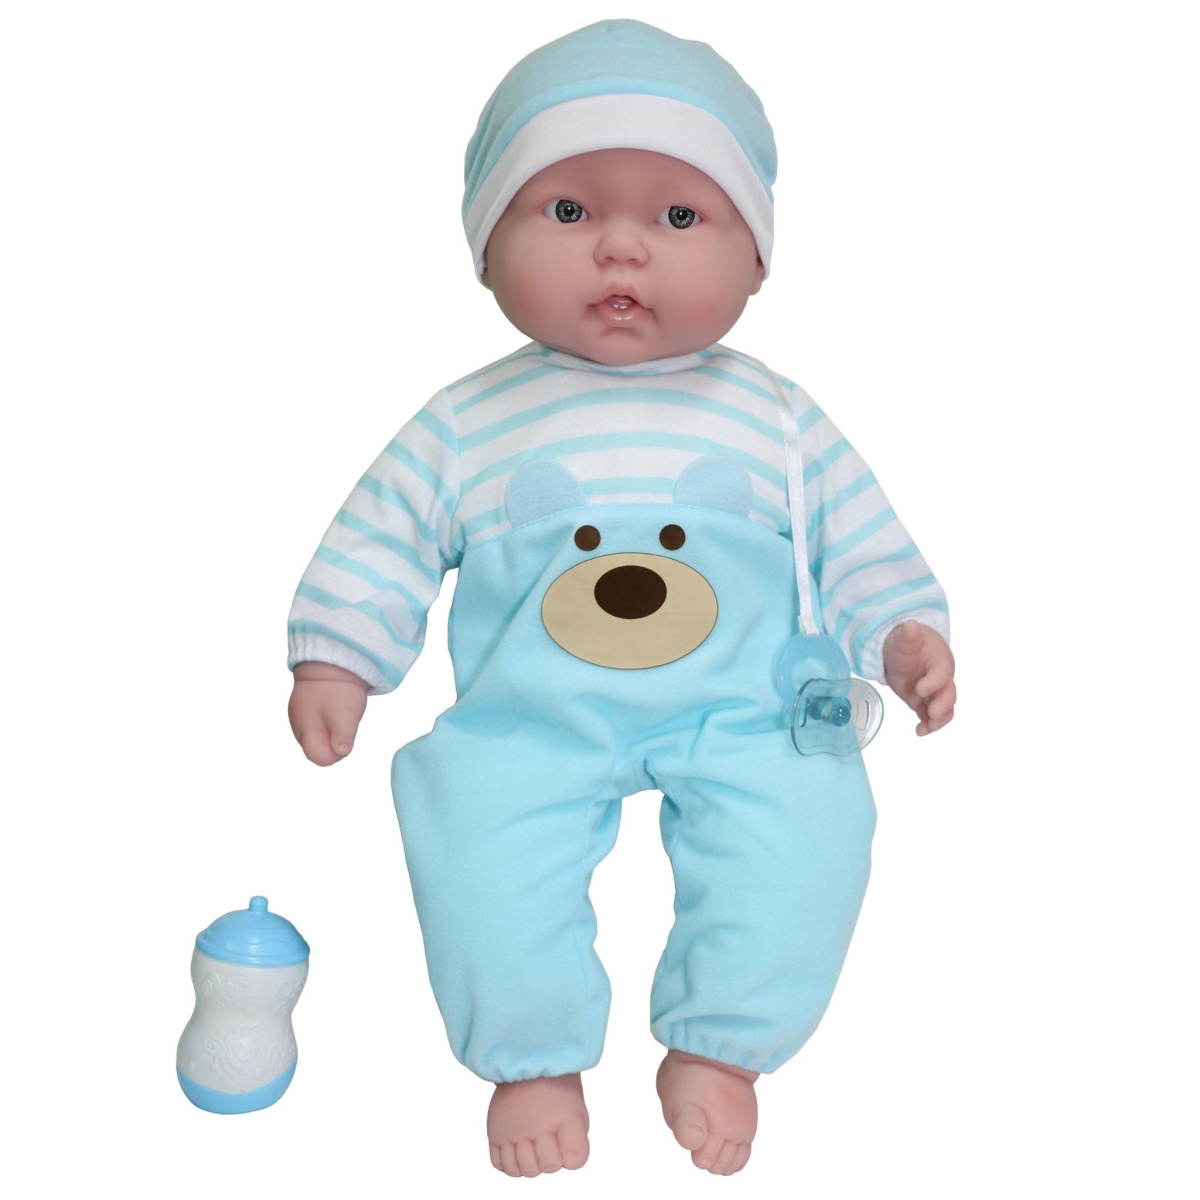 Picture of 20 in. Lots to Cuddle Babies Soft Body Baby Doll in Blue Outfit